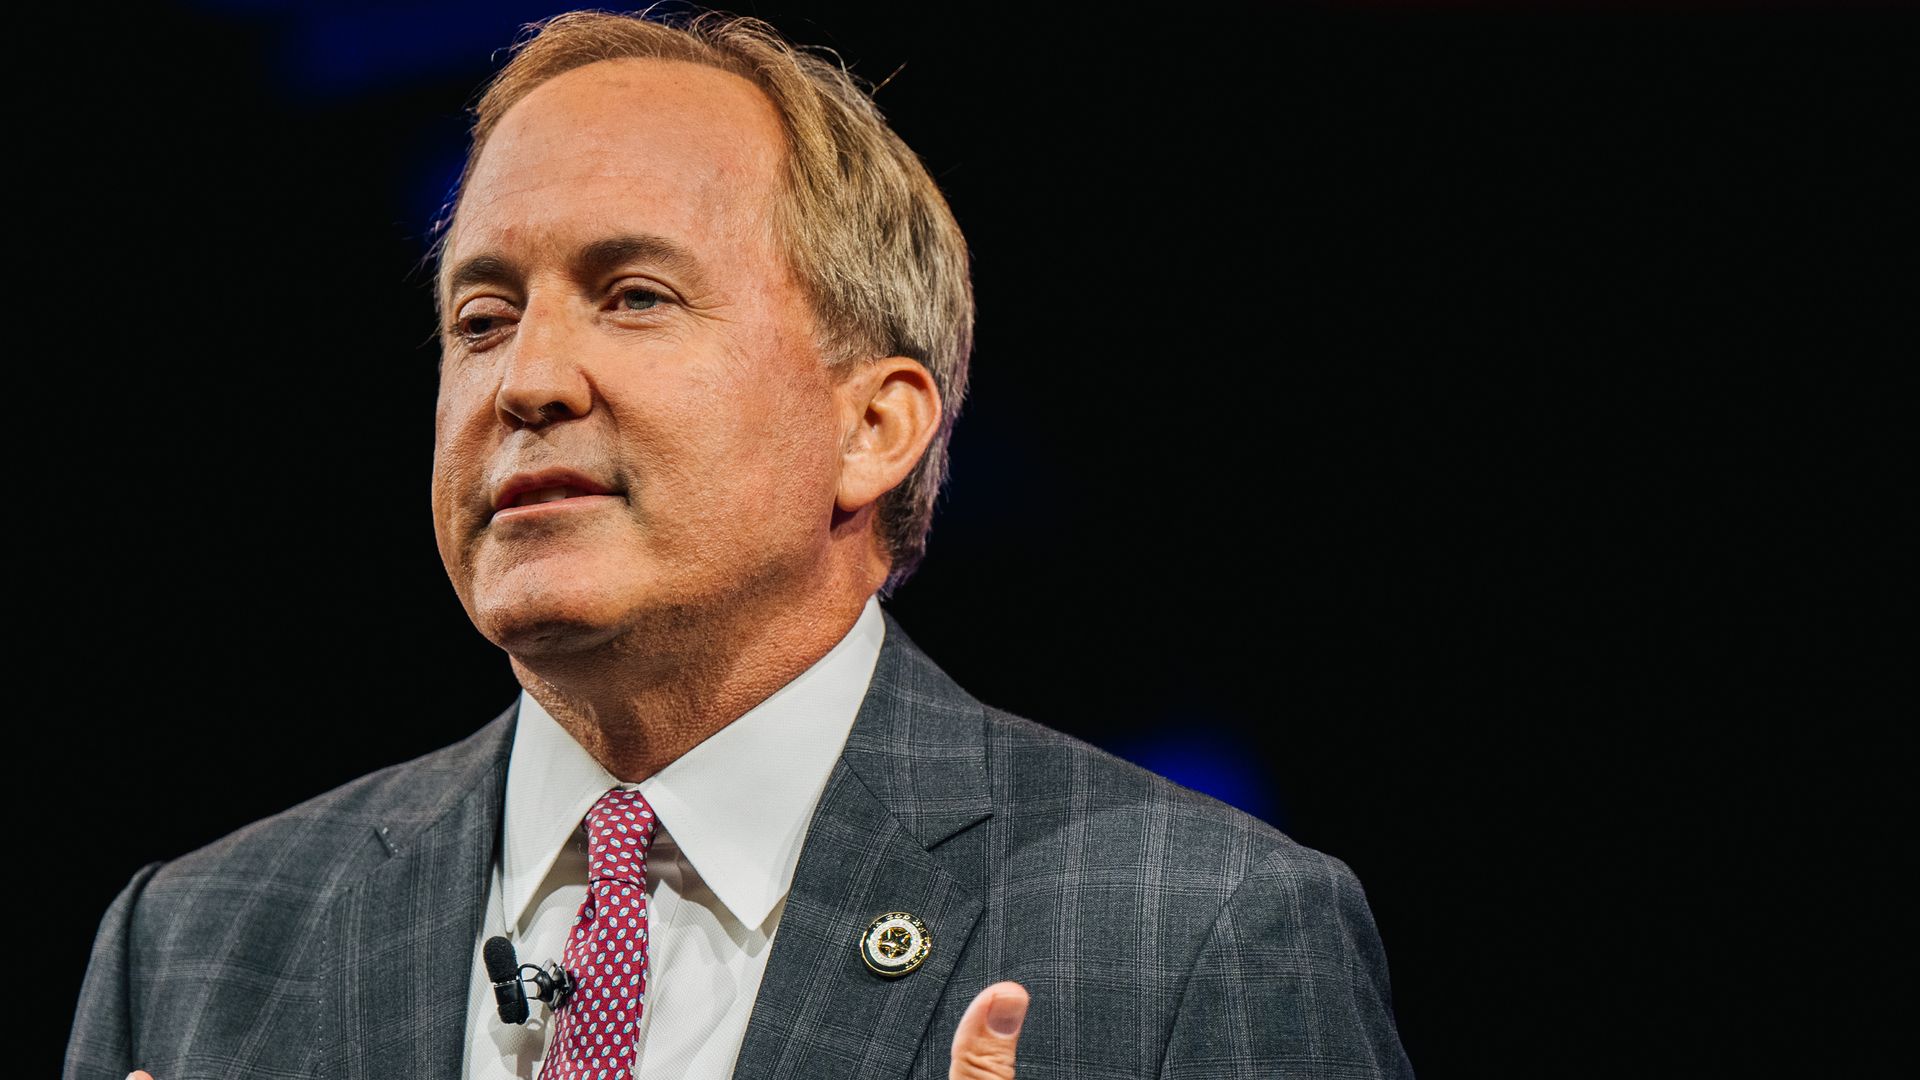 Texas Attorney General Ken Paxton speaks during the Conservative Political Action Conference CPAC held at the Hilton Anatole on July 11, 2021 in Dallas, Texas